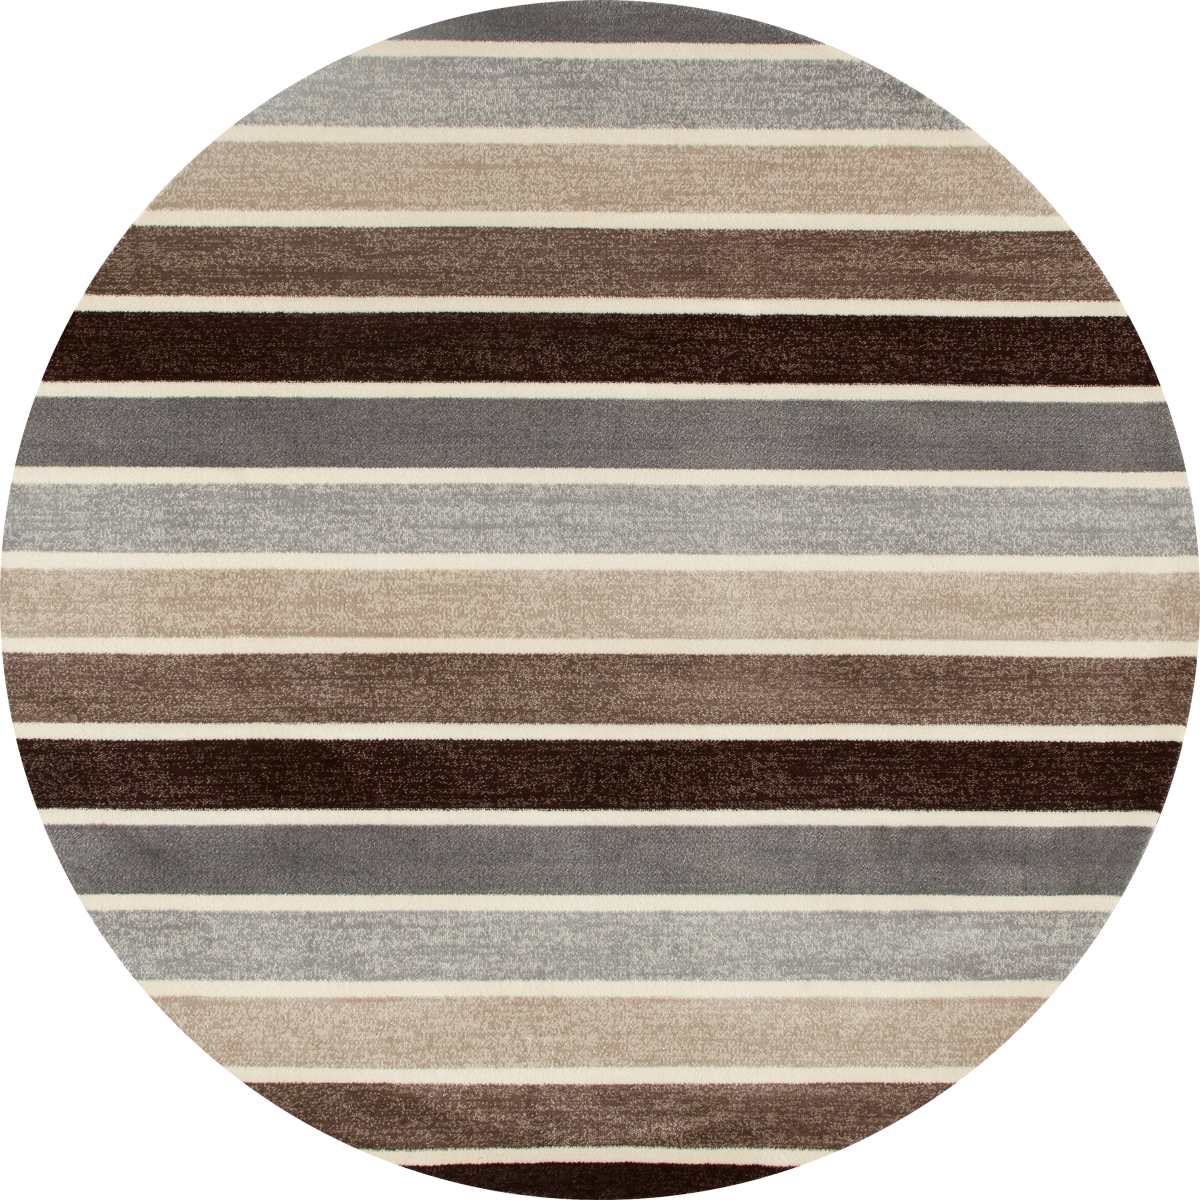 25726 8 Ft. Troy Collection Mainline Woven Round Area Rug, Brown